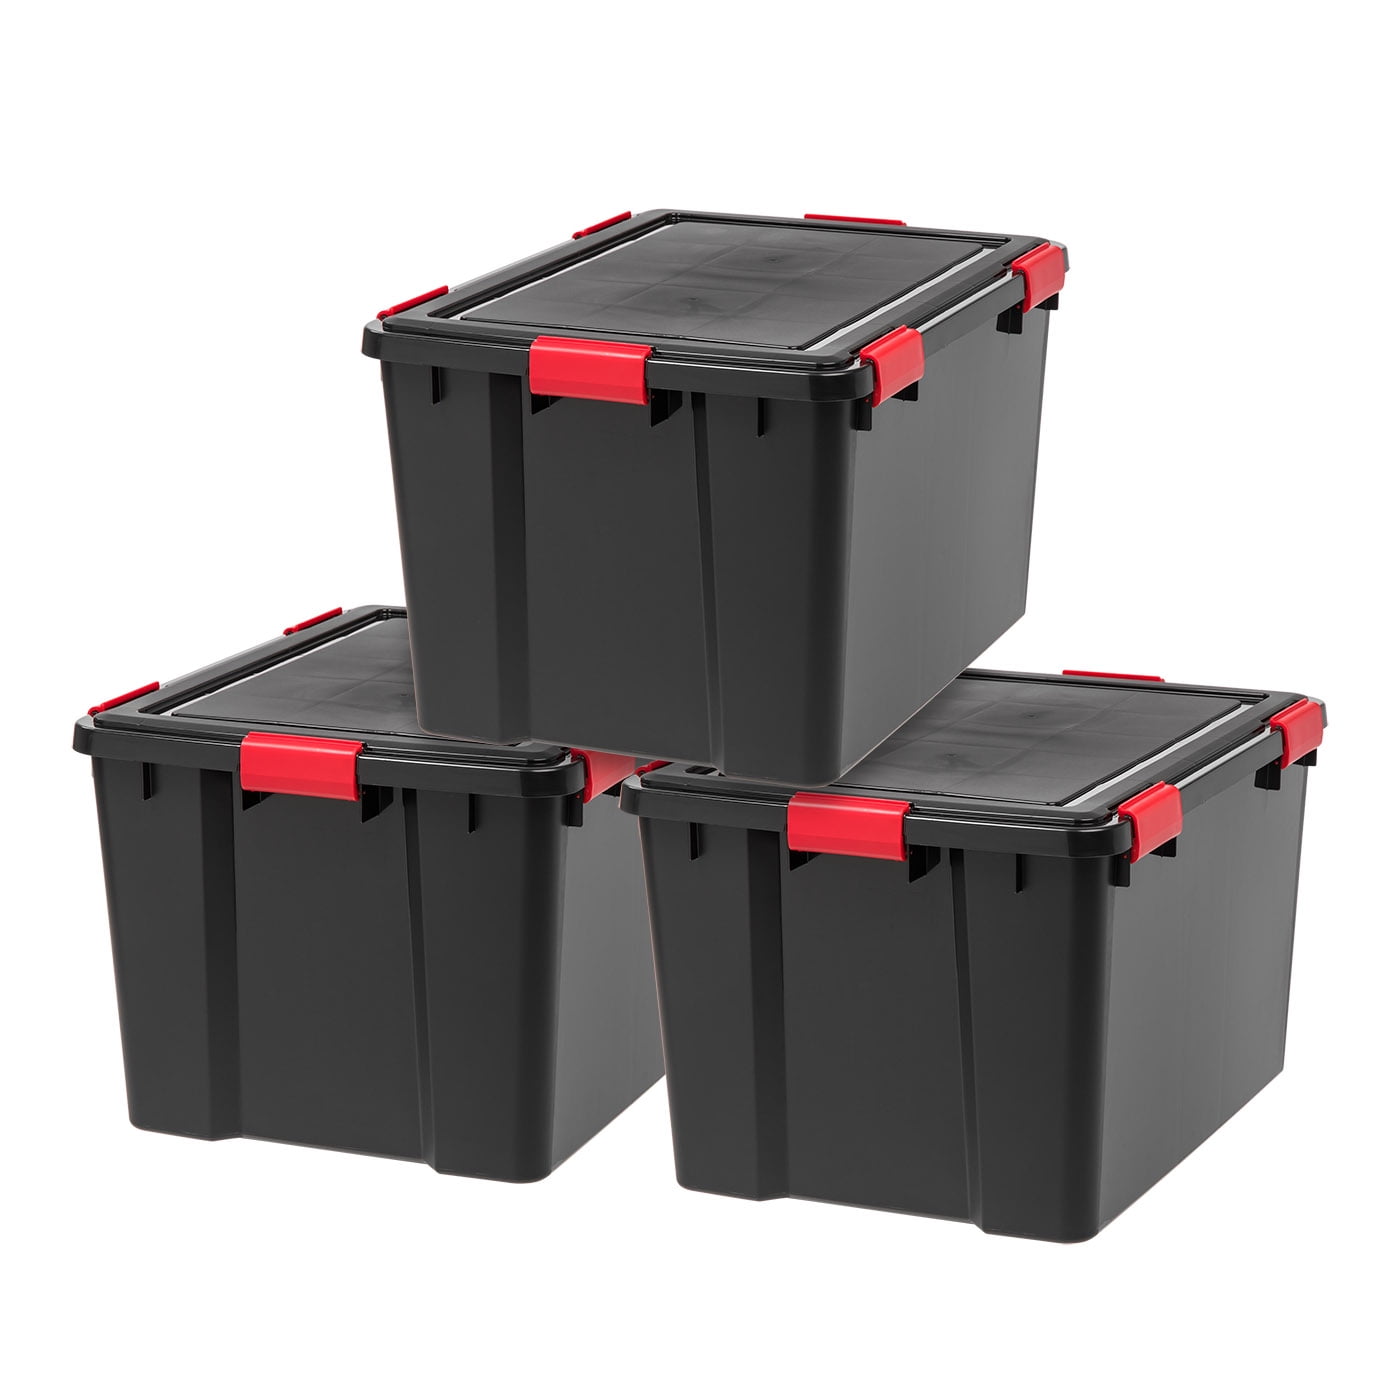  Citylife 64L Collapsible Storage Bins with Lids Plastic  Storage Containers for Organizing Stackable Storage Box Large Heavy Duty  Utility Crates, 2 Packs